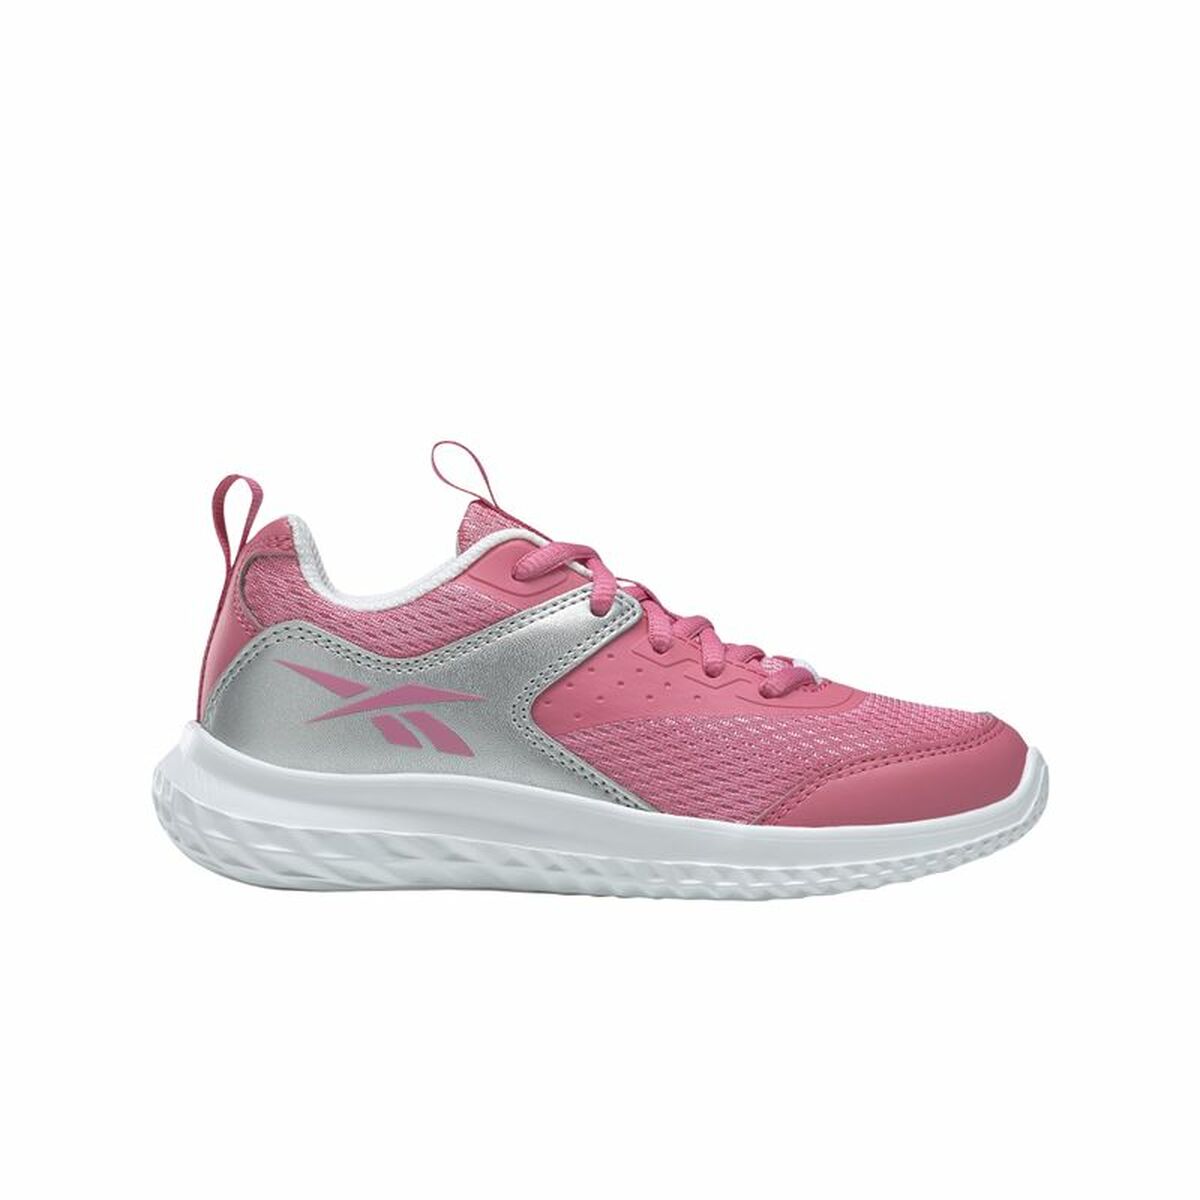 Sports Shoes for Kids Reebok Rush Runner 4 Pink